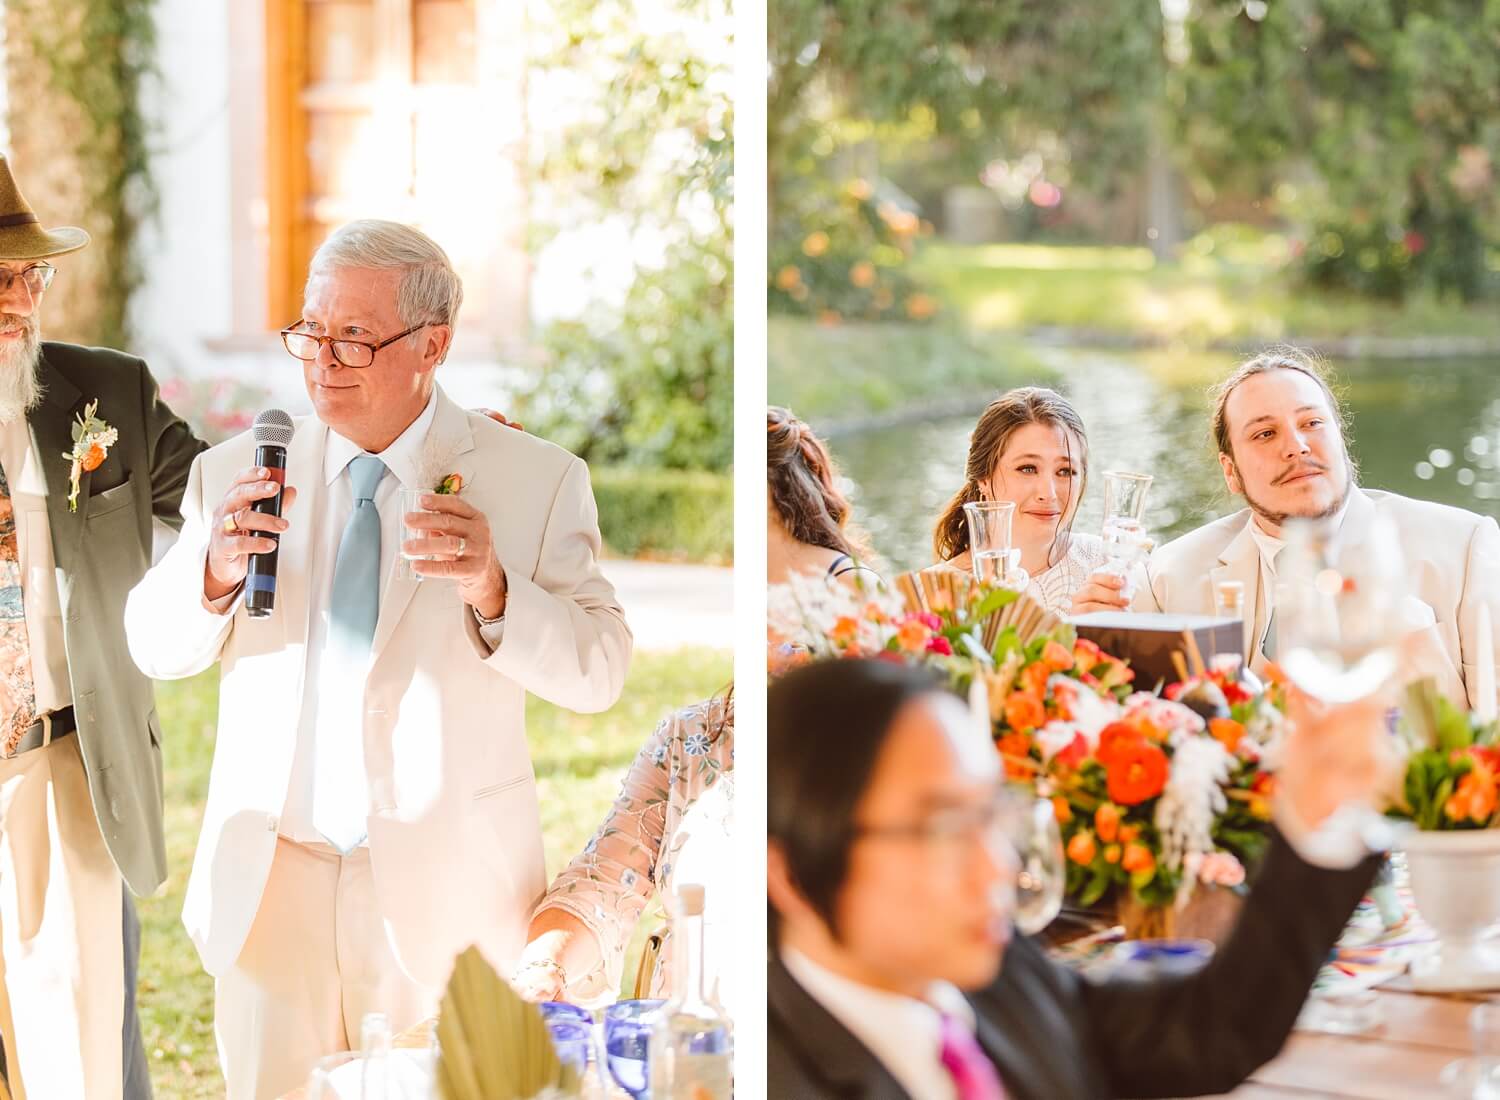 Father of the bride giving toast at wedding | bride tearing up during father's toast | Brooke Michelle Photo